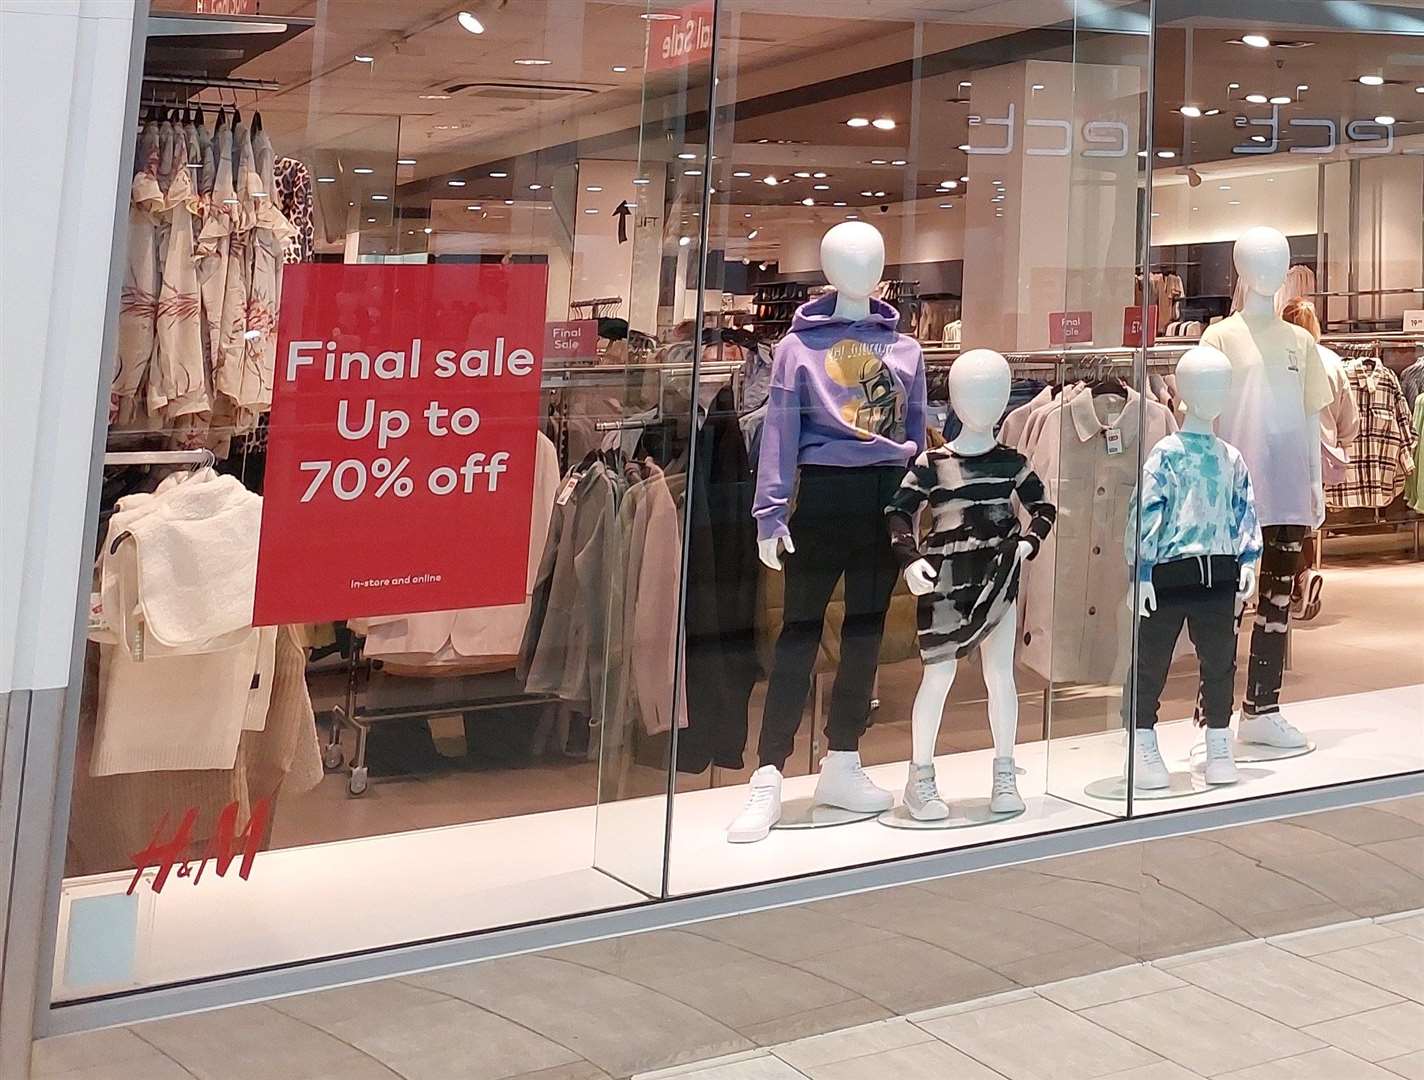 'Final sale' signs have appeared at the H&M store